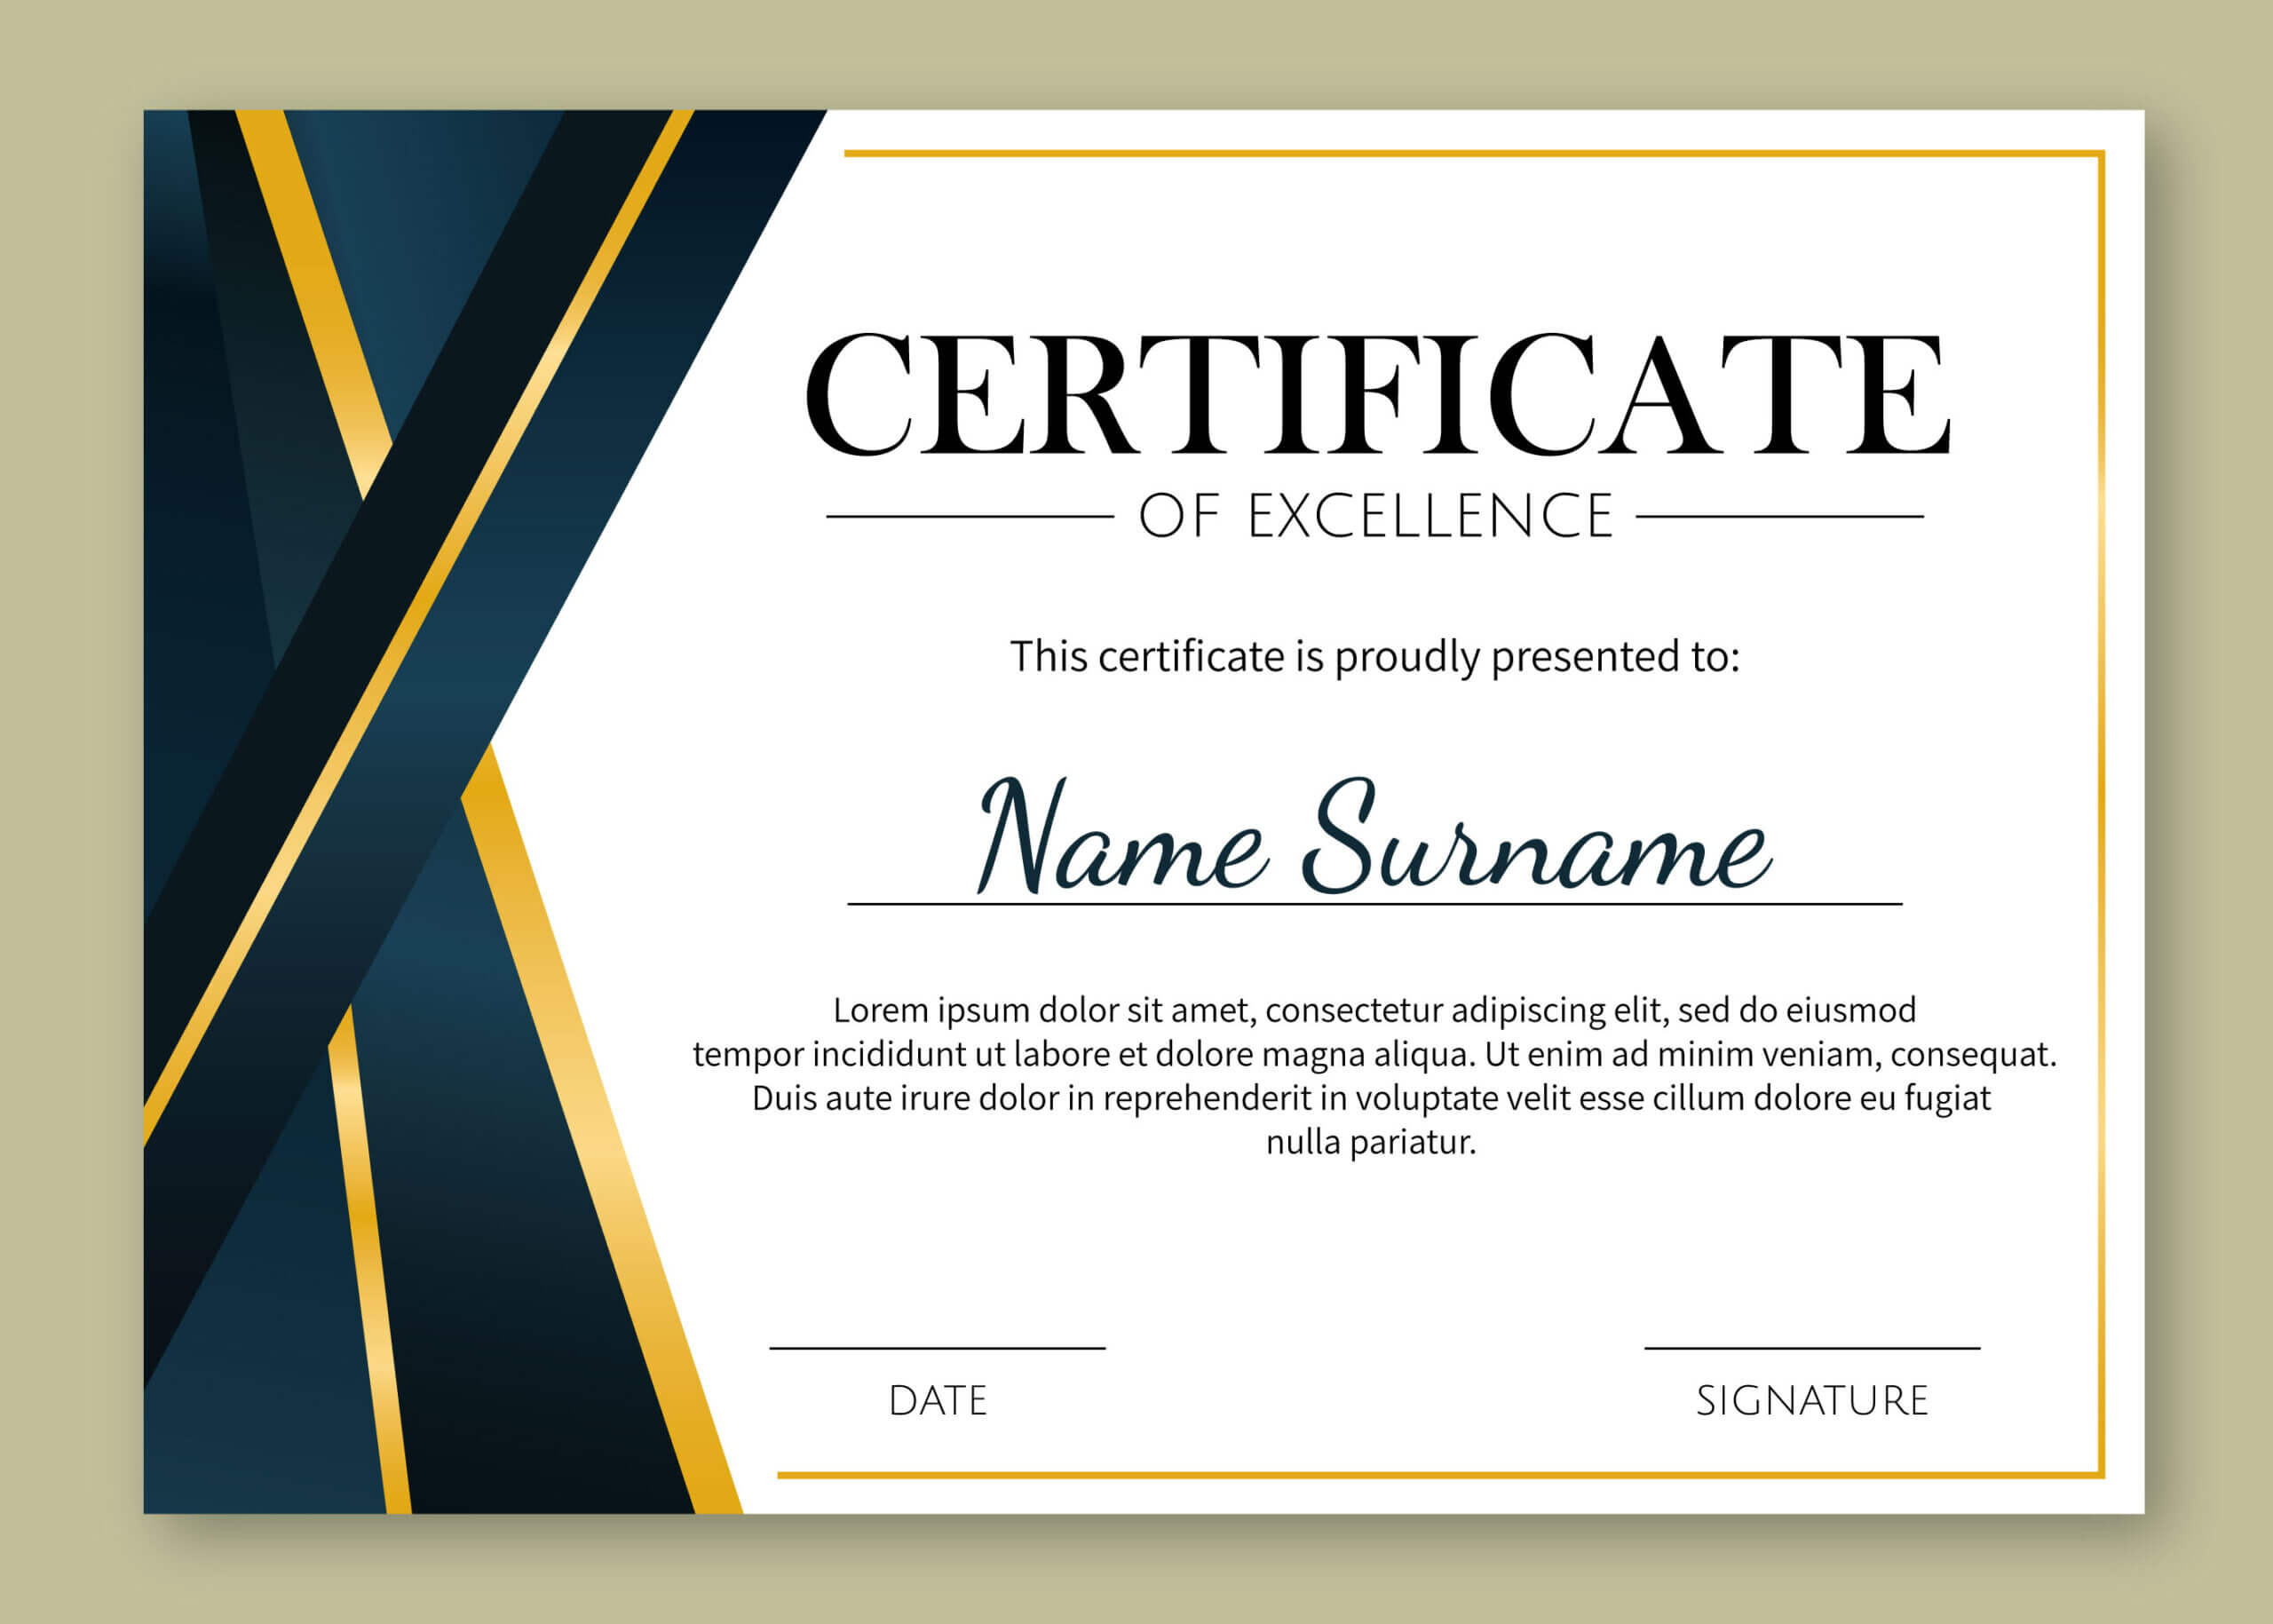 Certificate Of Excellence Template Free Download With Certificate Of Excellence Template Free Download